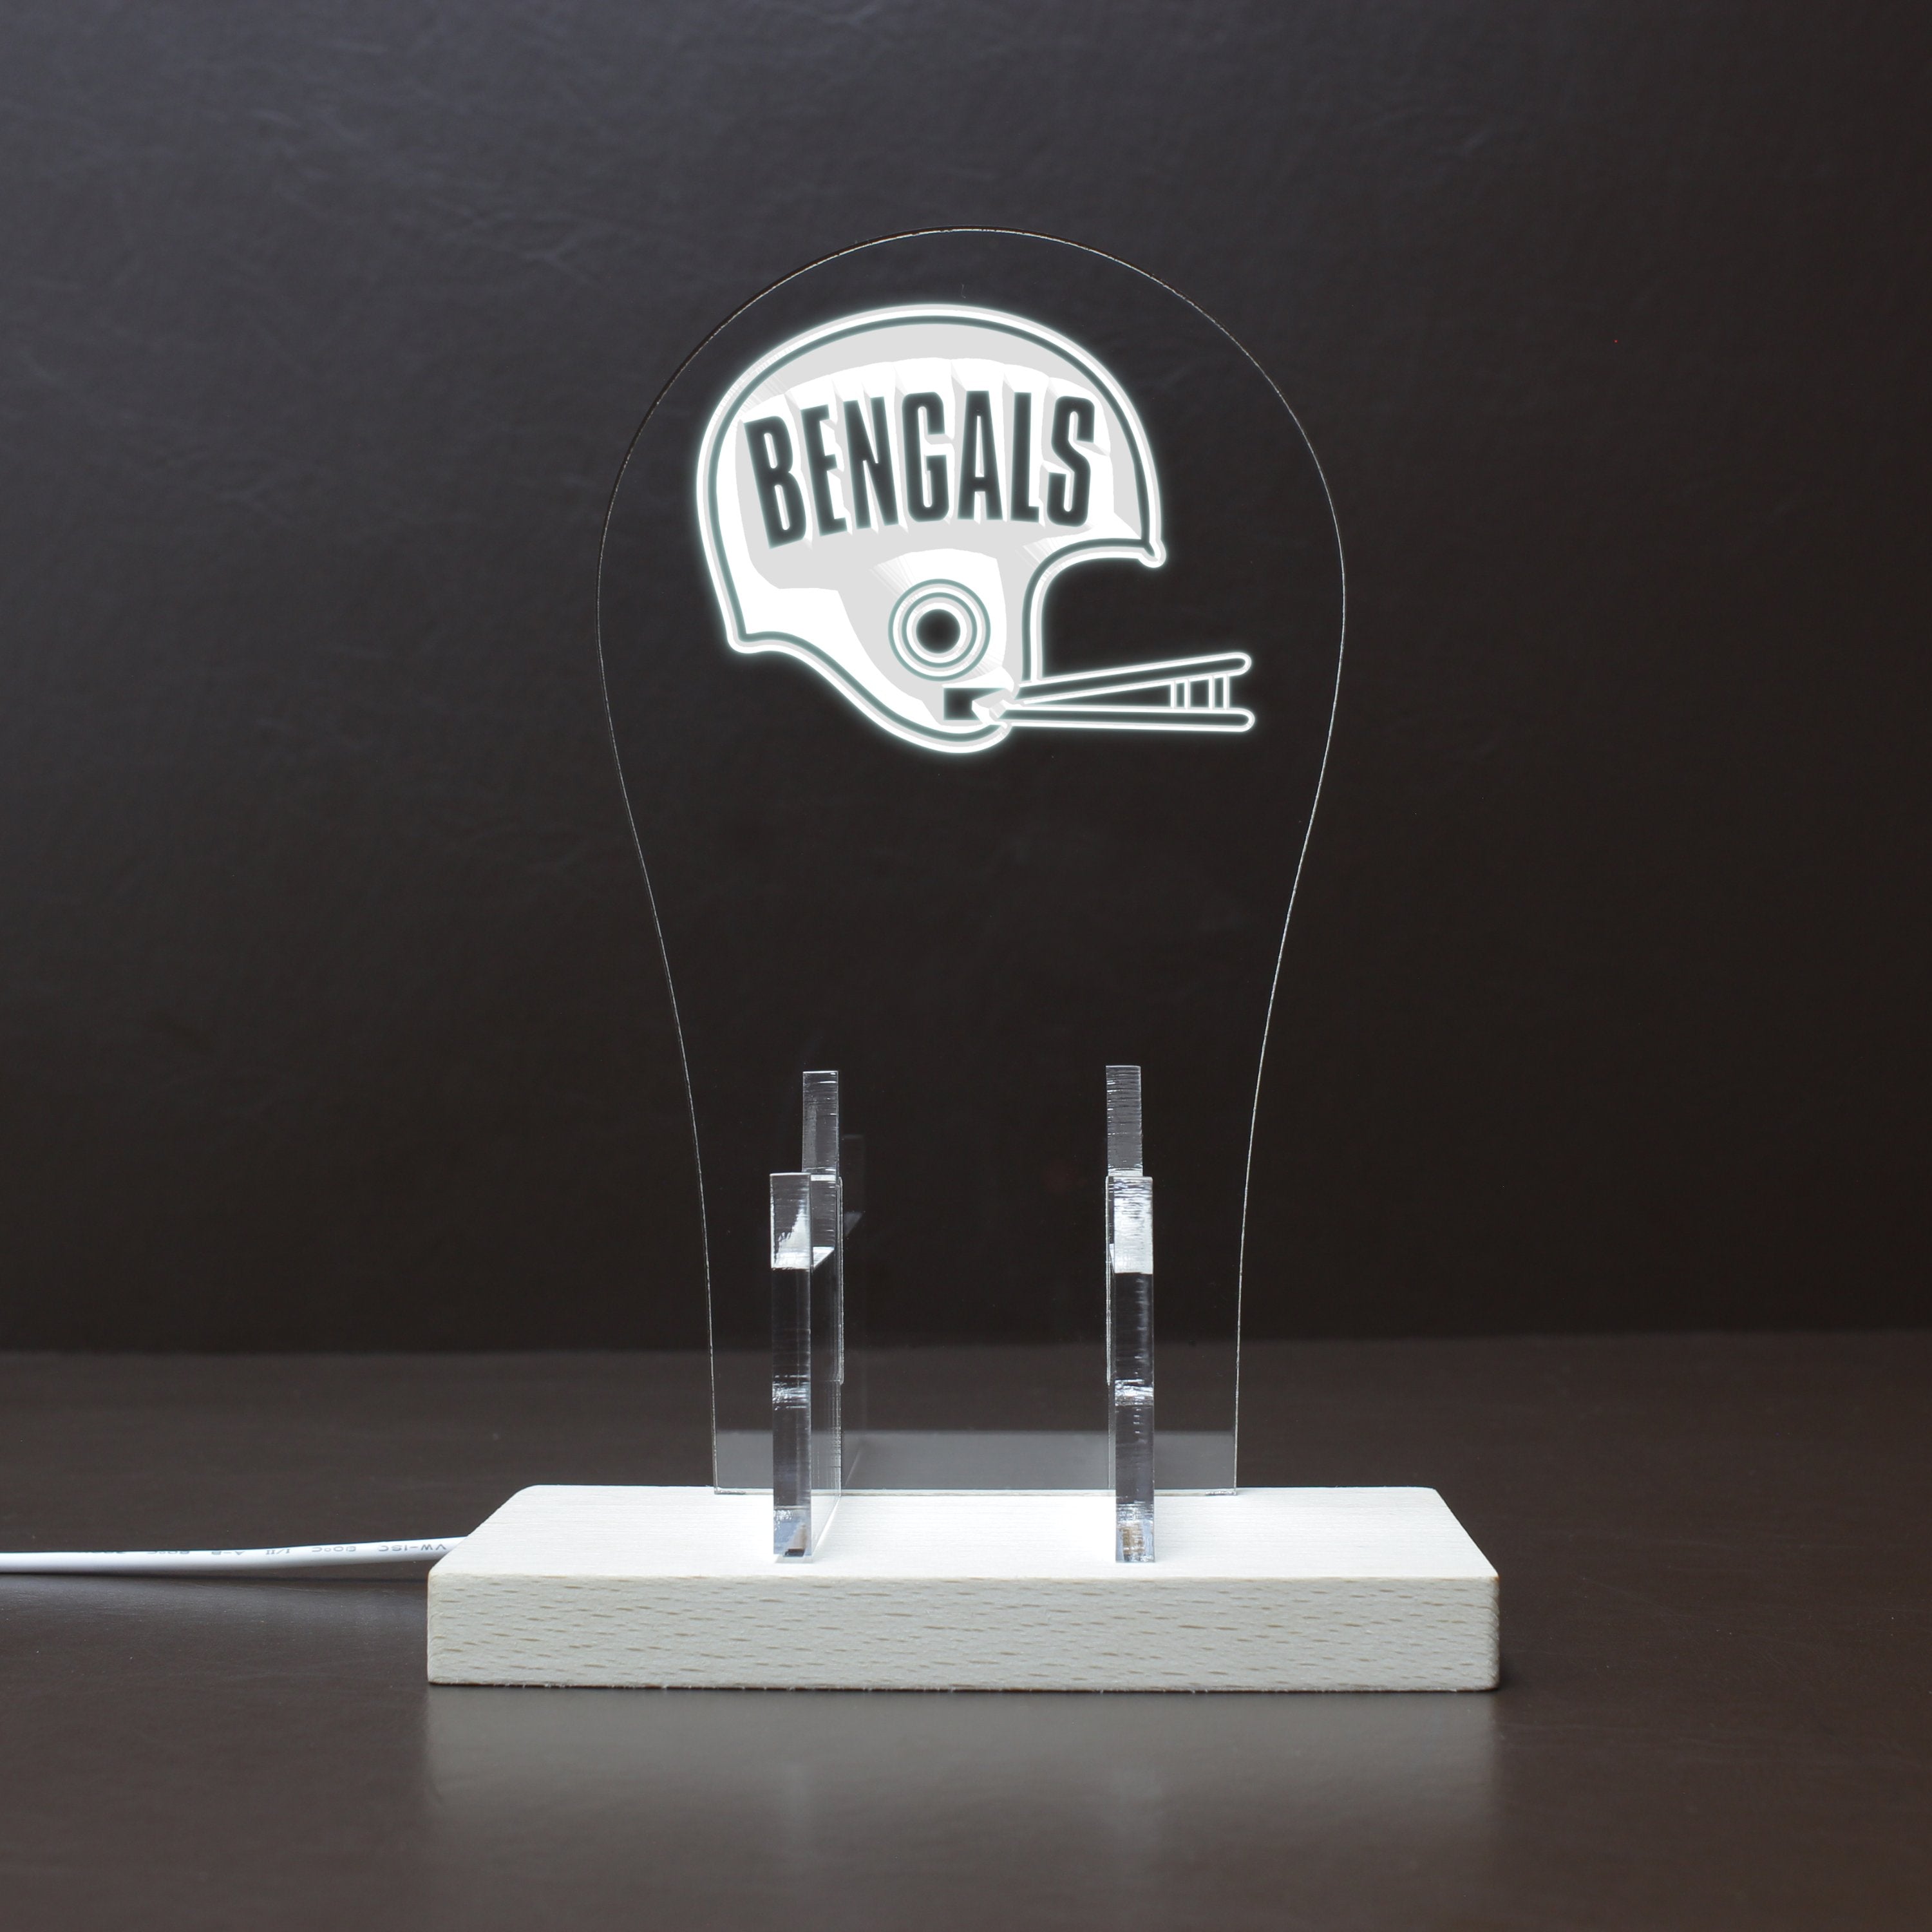 Cincinnati Bengals primary logo in use from 1970-1980 RGB LED Gaming Headset Controller Stand